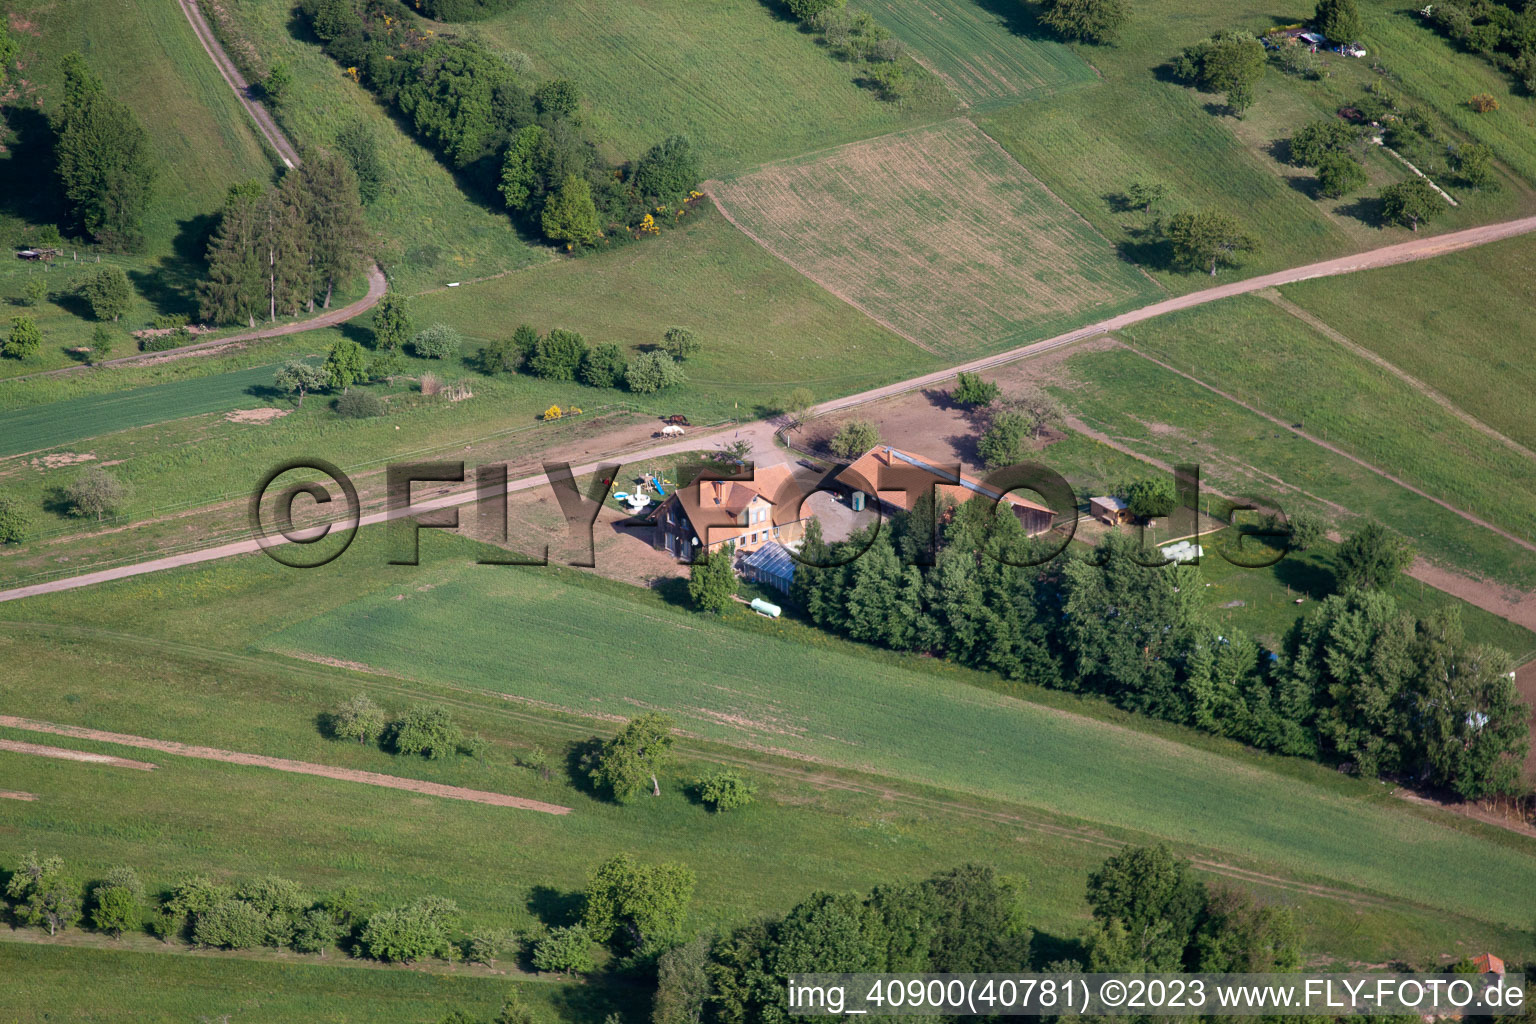 Aerial view of Bergstr in Eppenbrunn in the state Rhineland-Palatinate, Germany